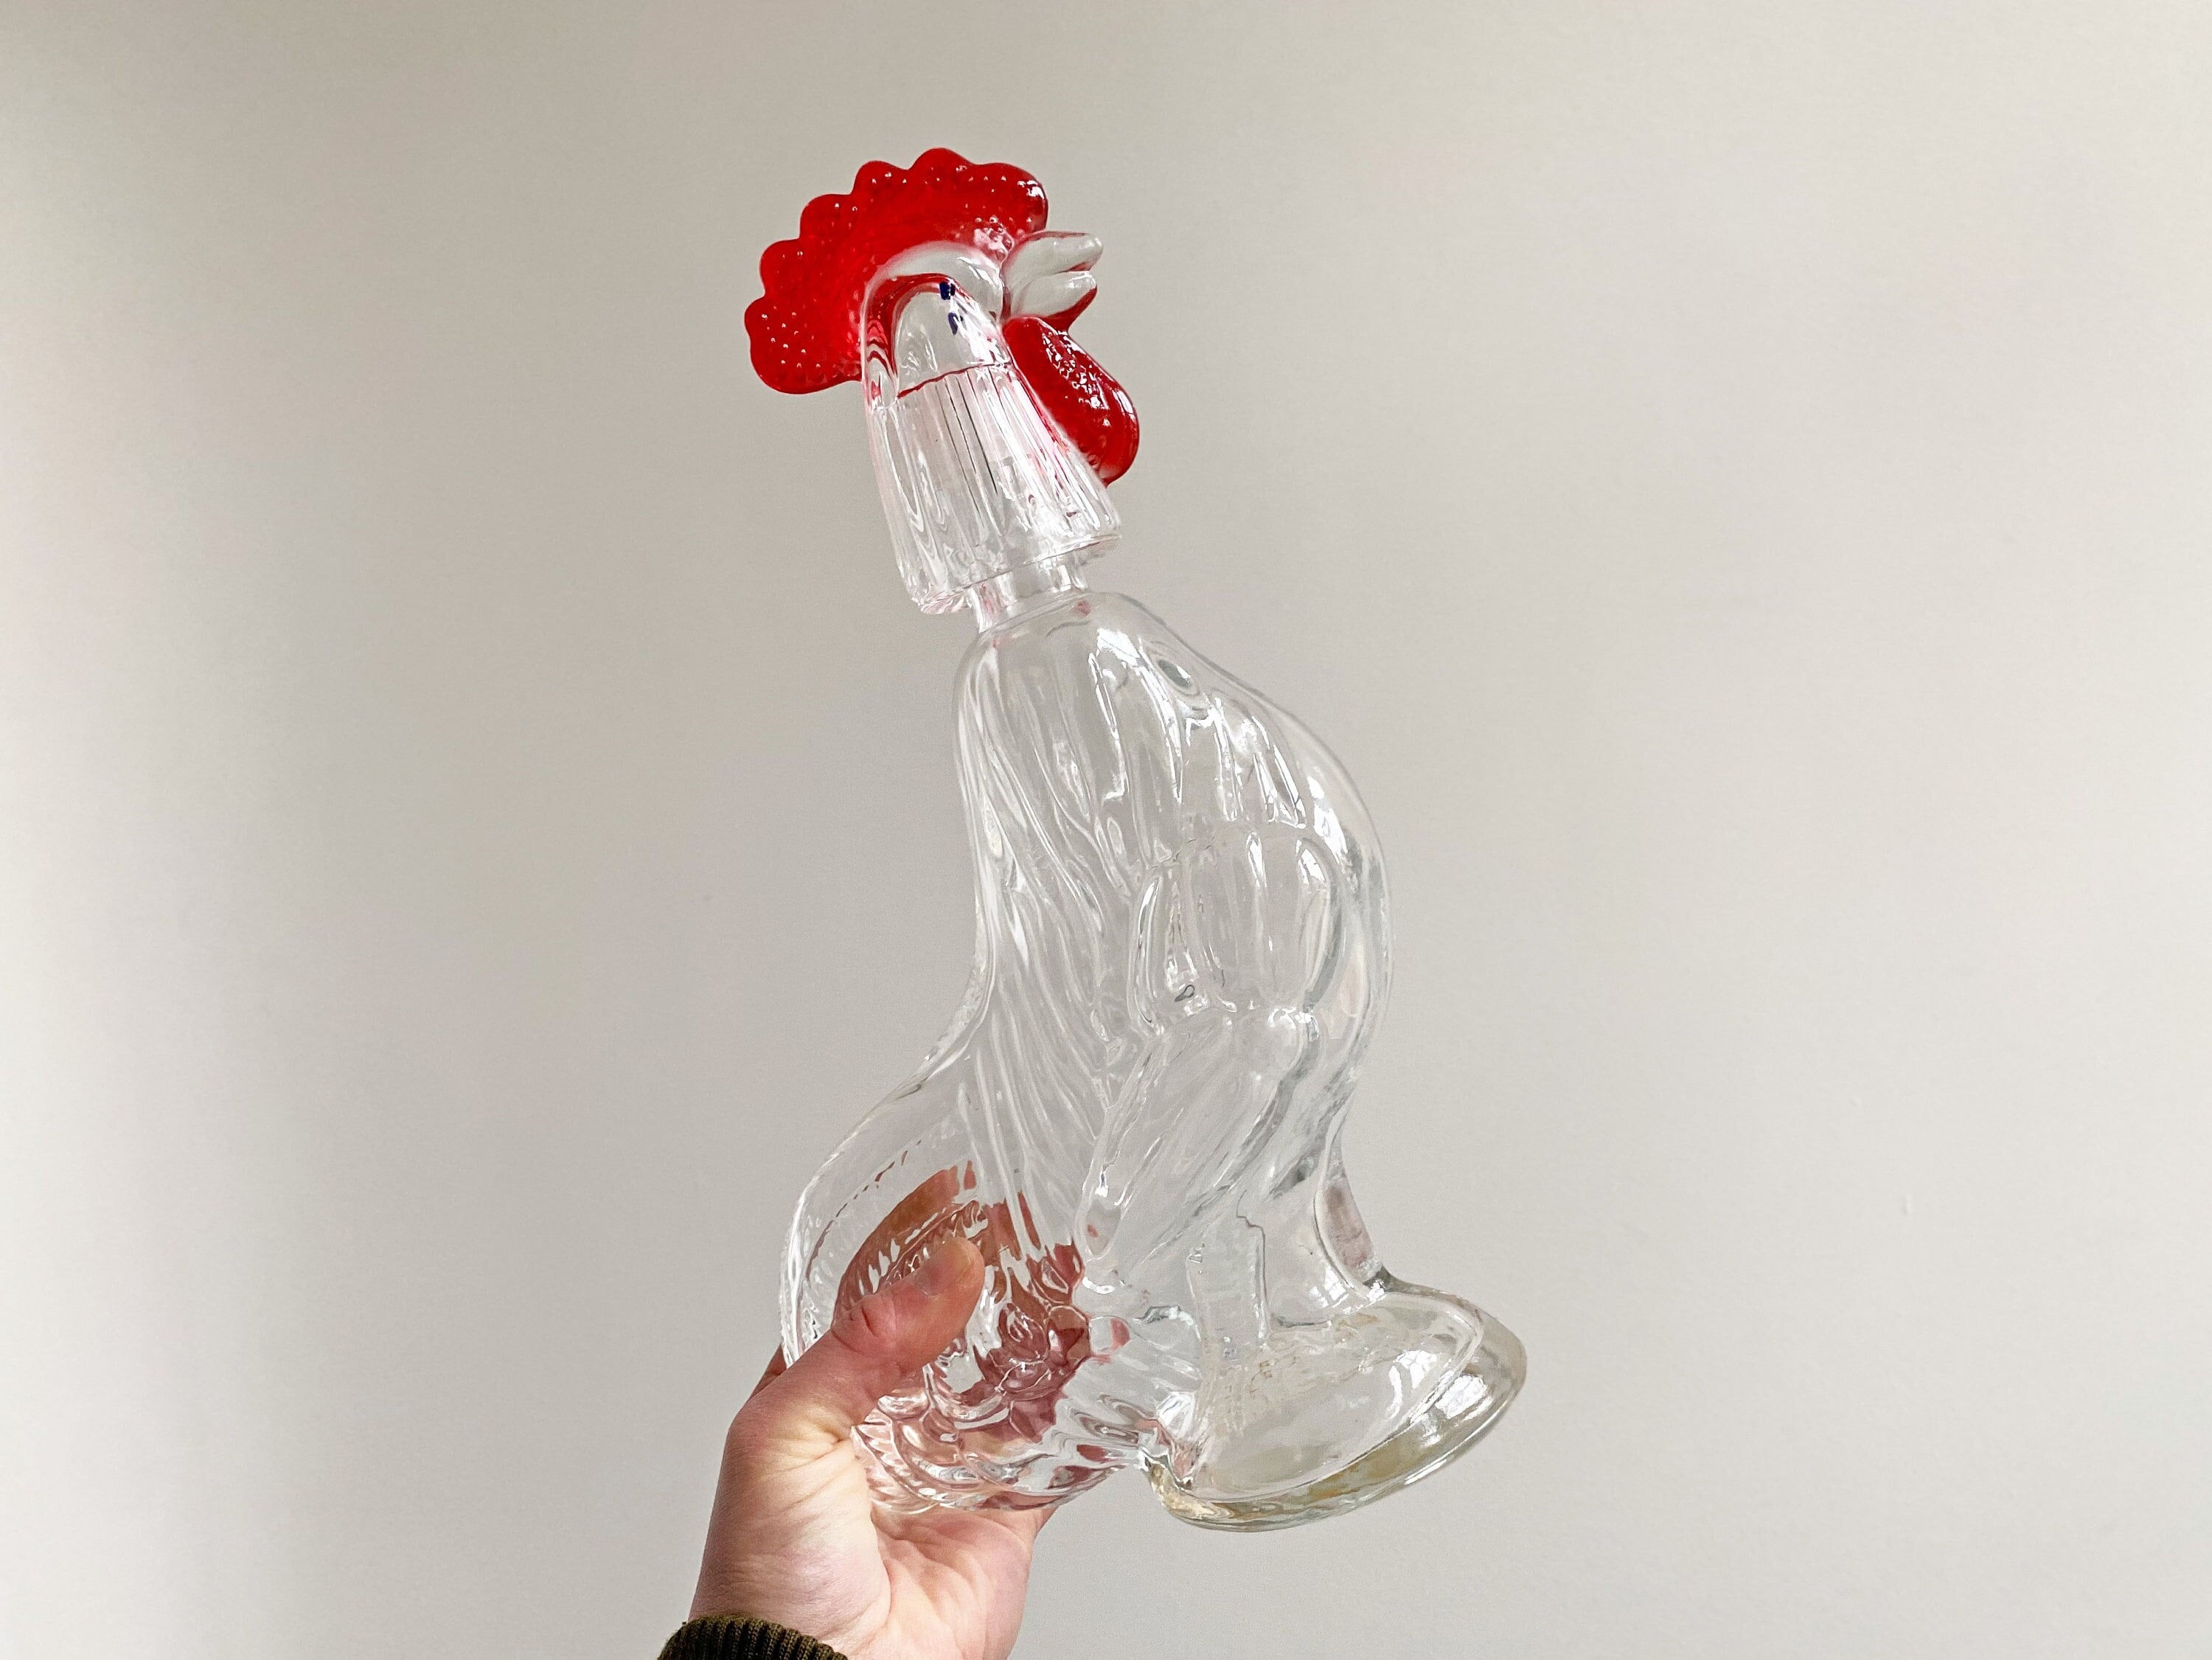 Cock - Chicken Decanter 500ml Whiskey and Wine Decanter Set with 2 Whiskey  Glasses - by The Wine Savant, Rooster Glass Decanter For Whiskey, Scotch,  Spirits, Wine Or Vodka For Whiskey Lovers 